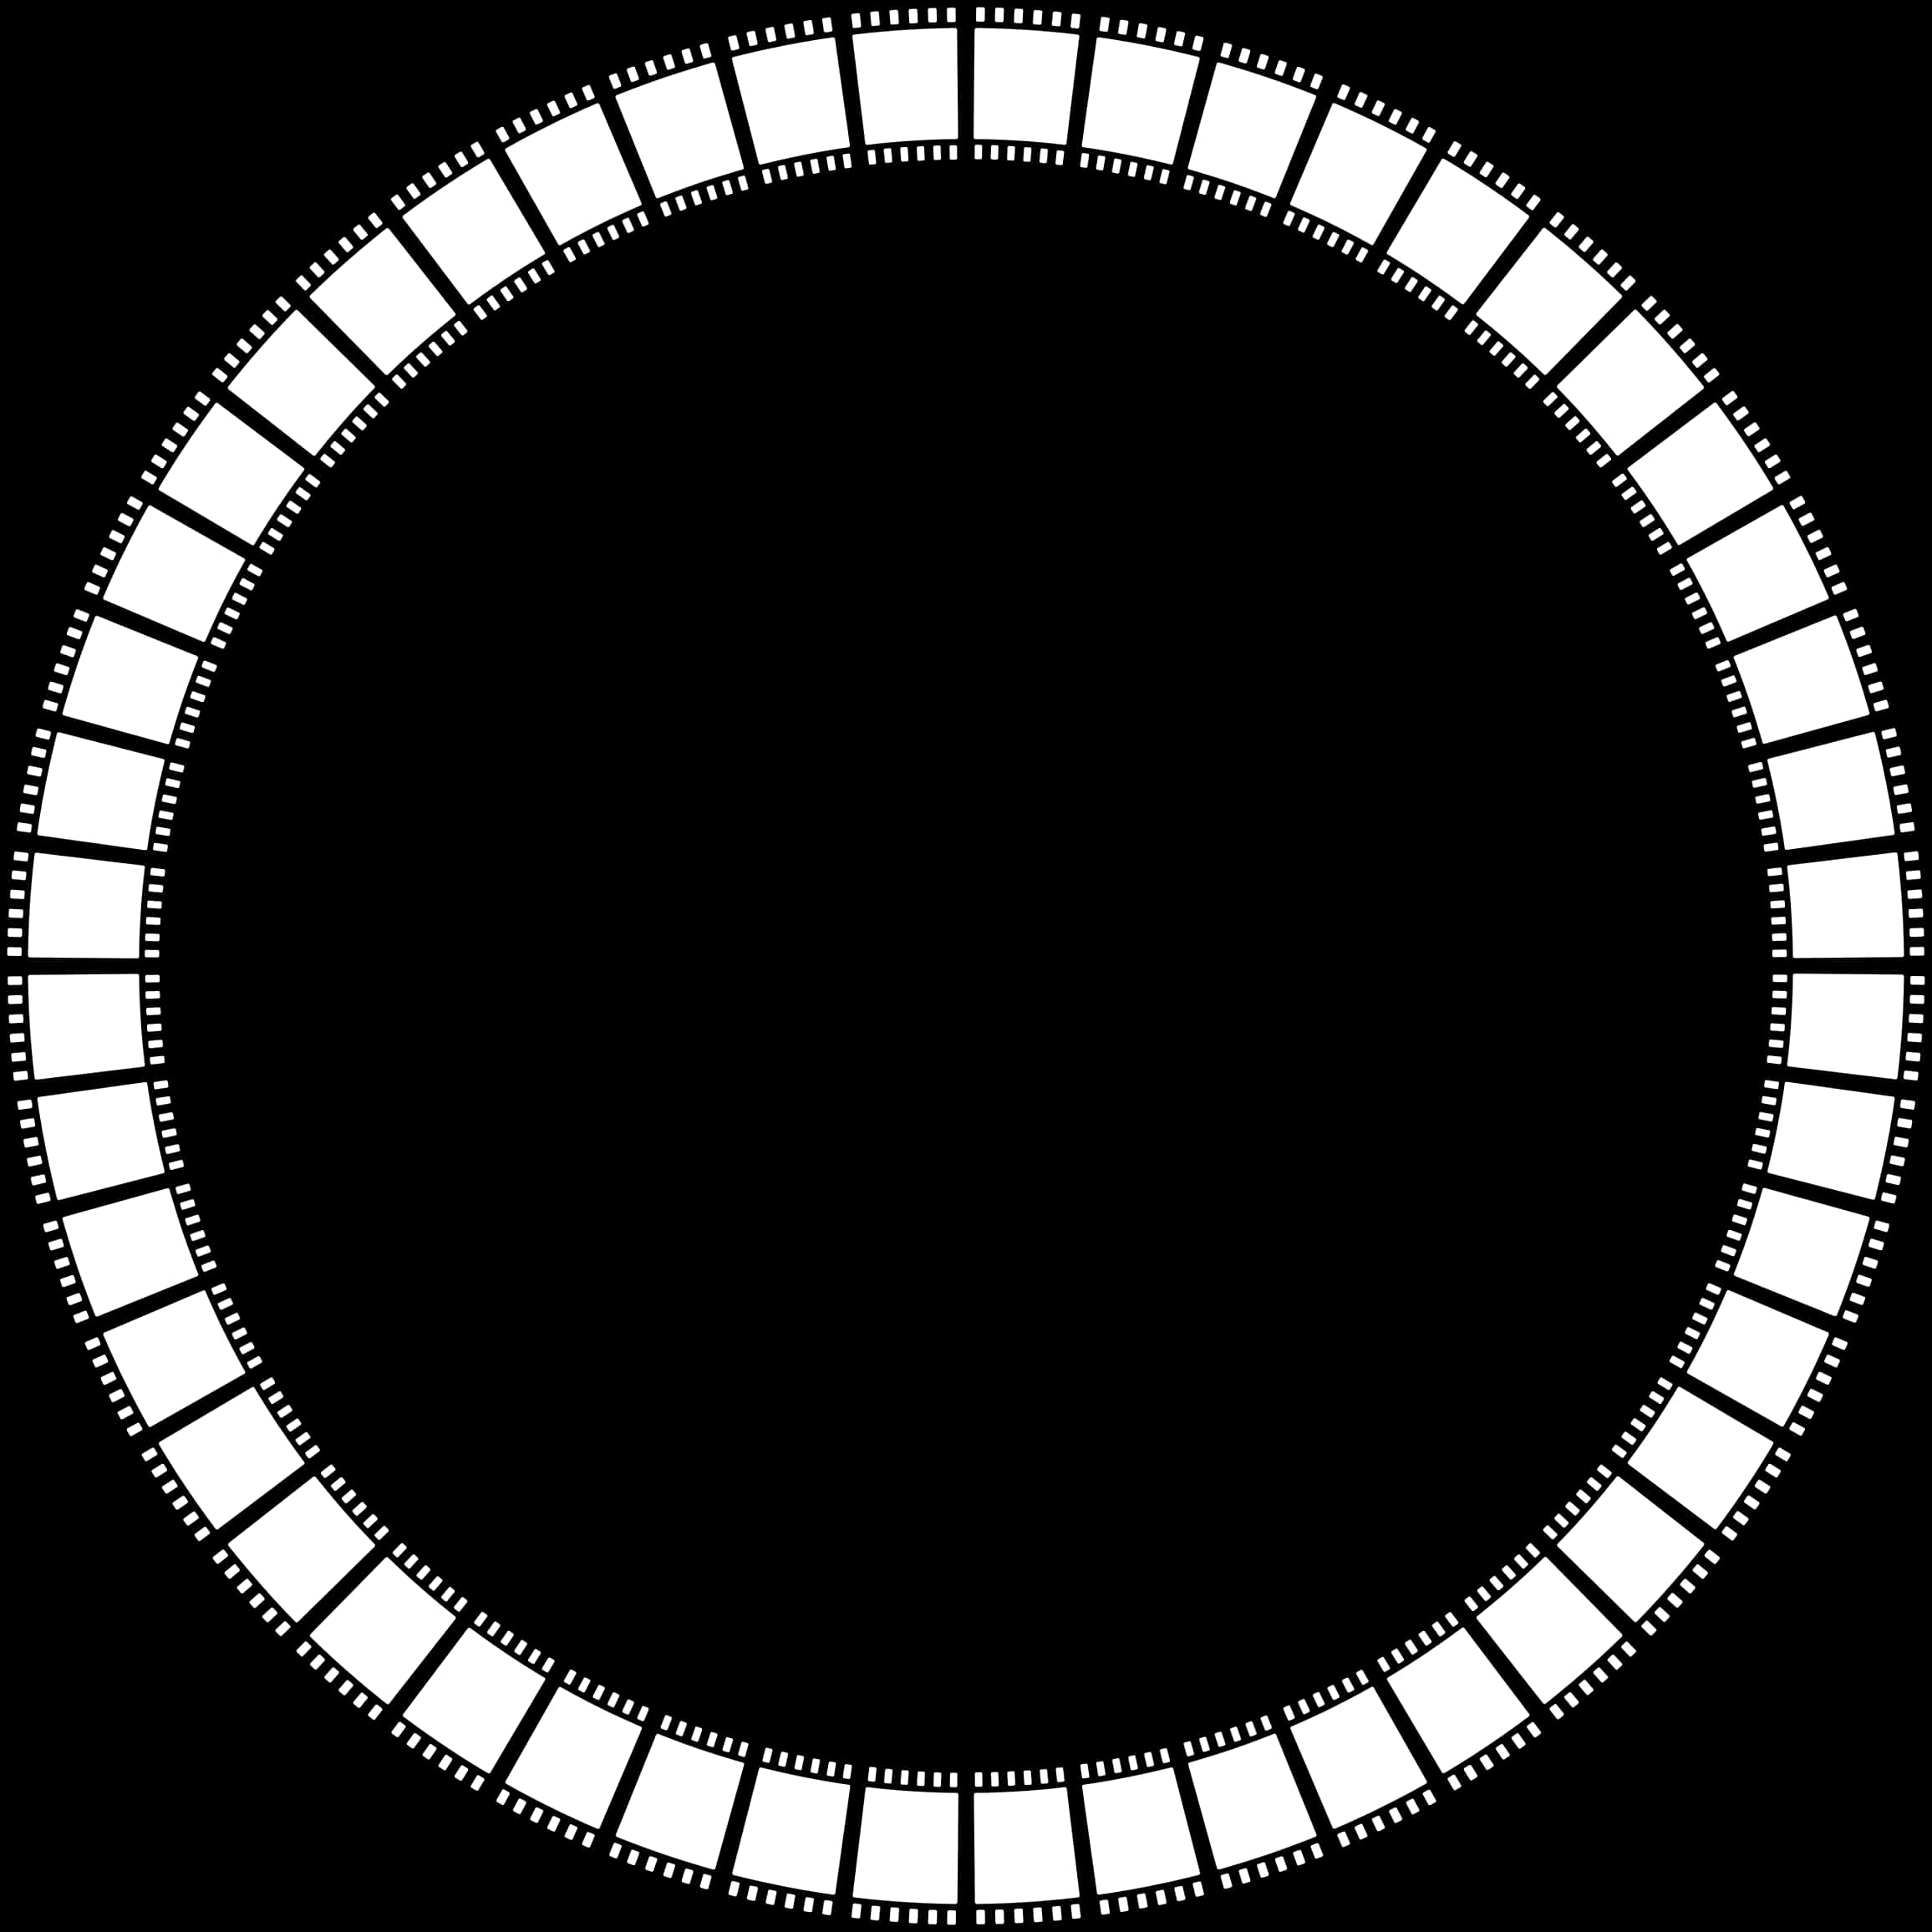 A Circular Frame With A Black Background